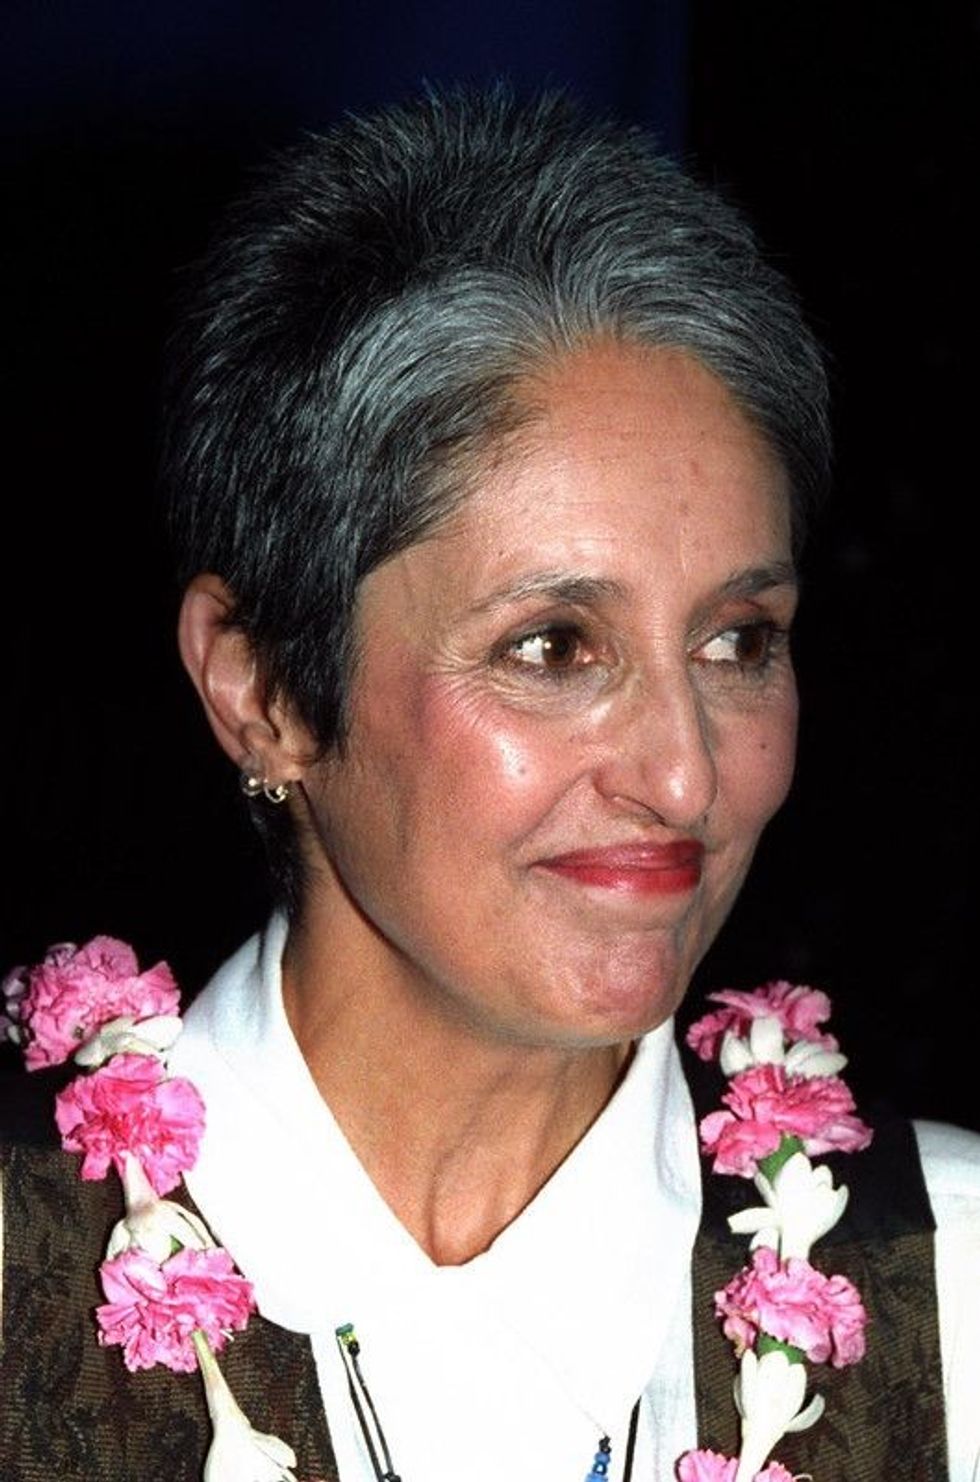 For a mind-changing experience, read these Joan Baez quotes!